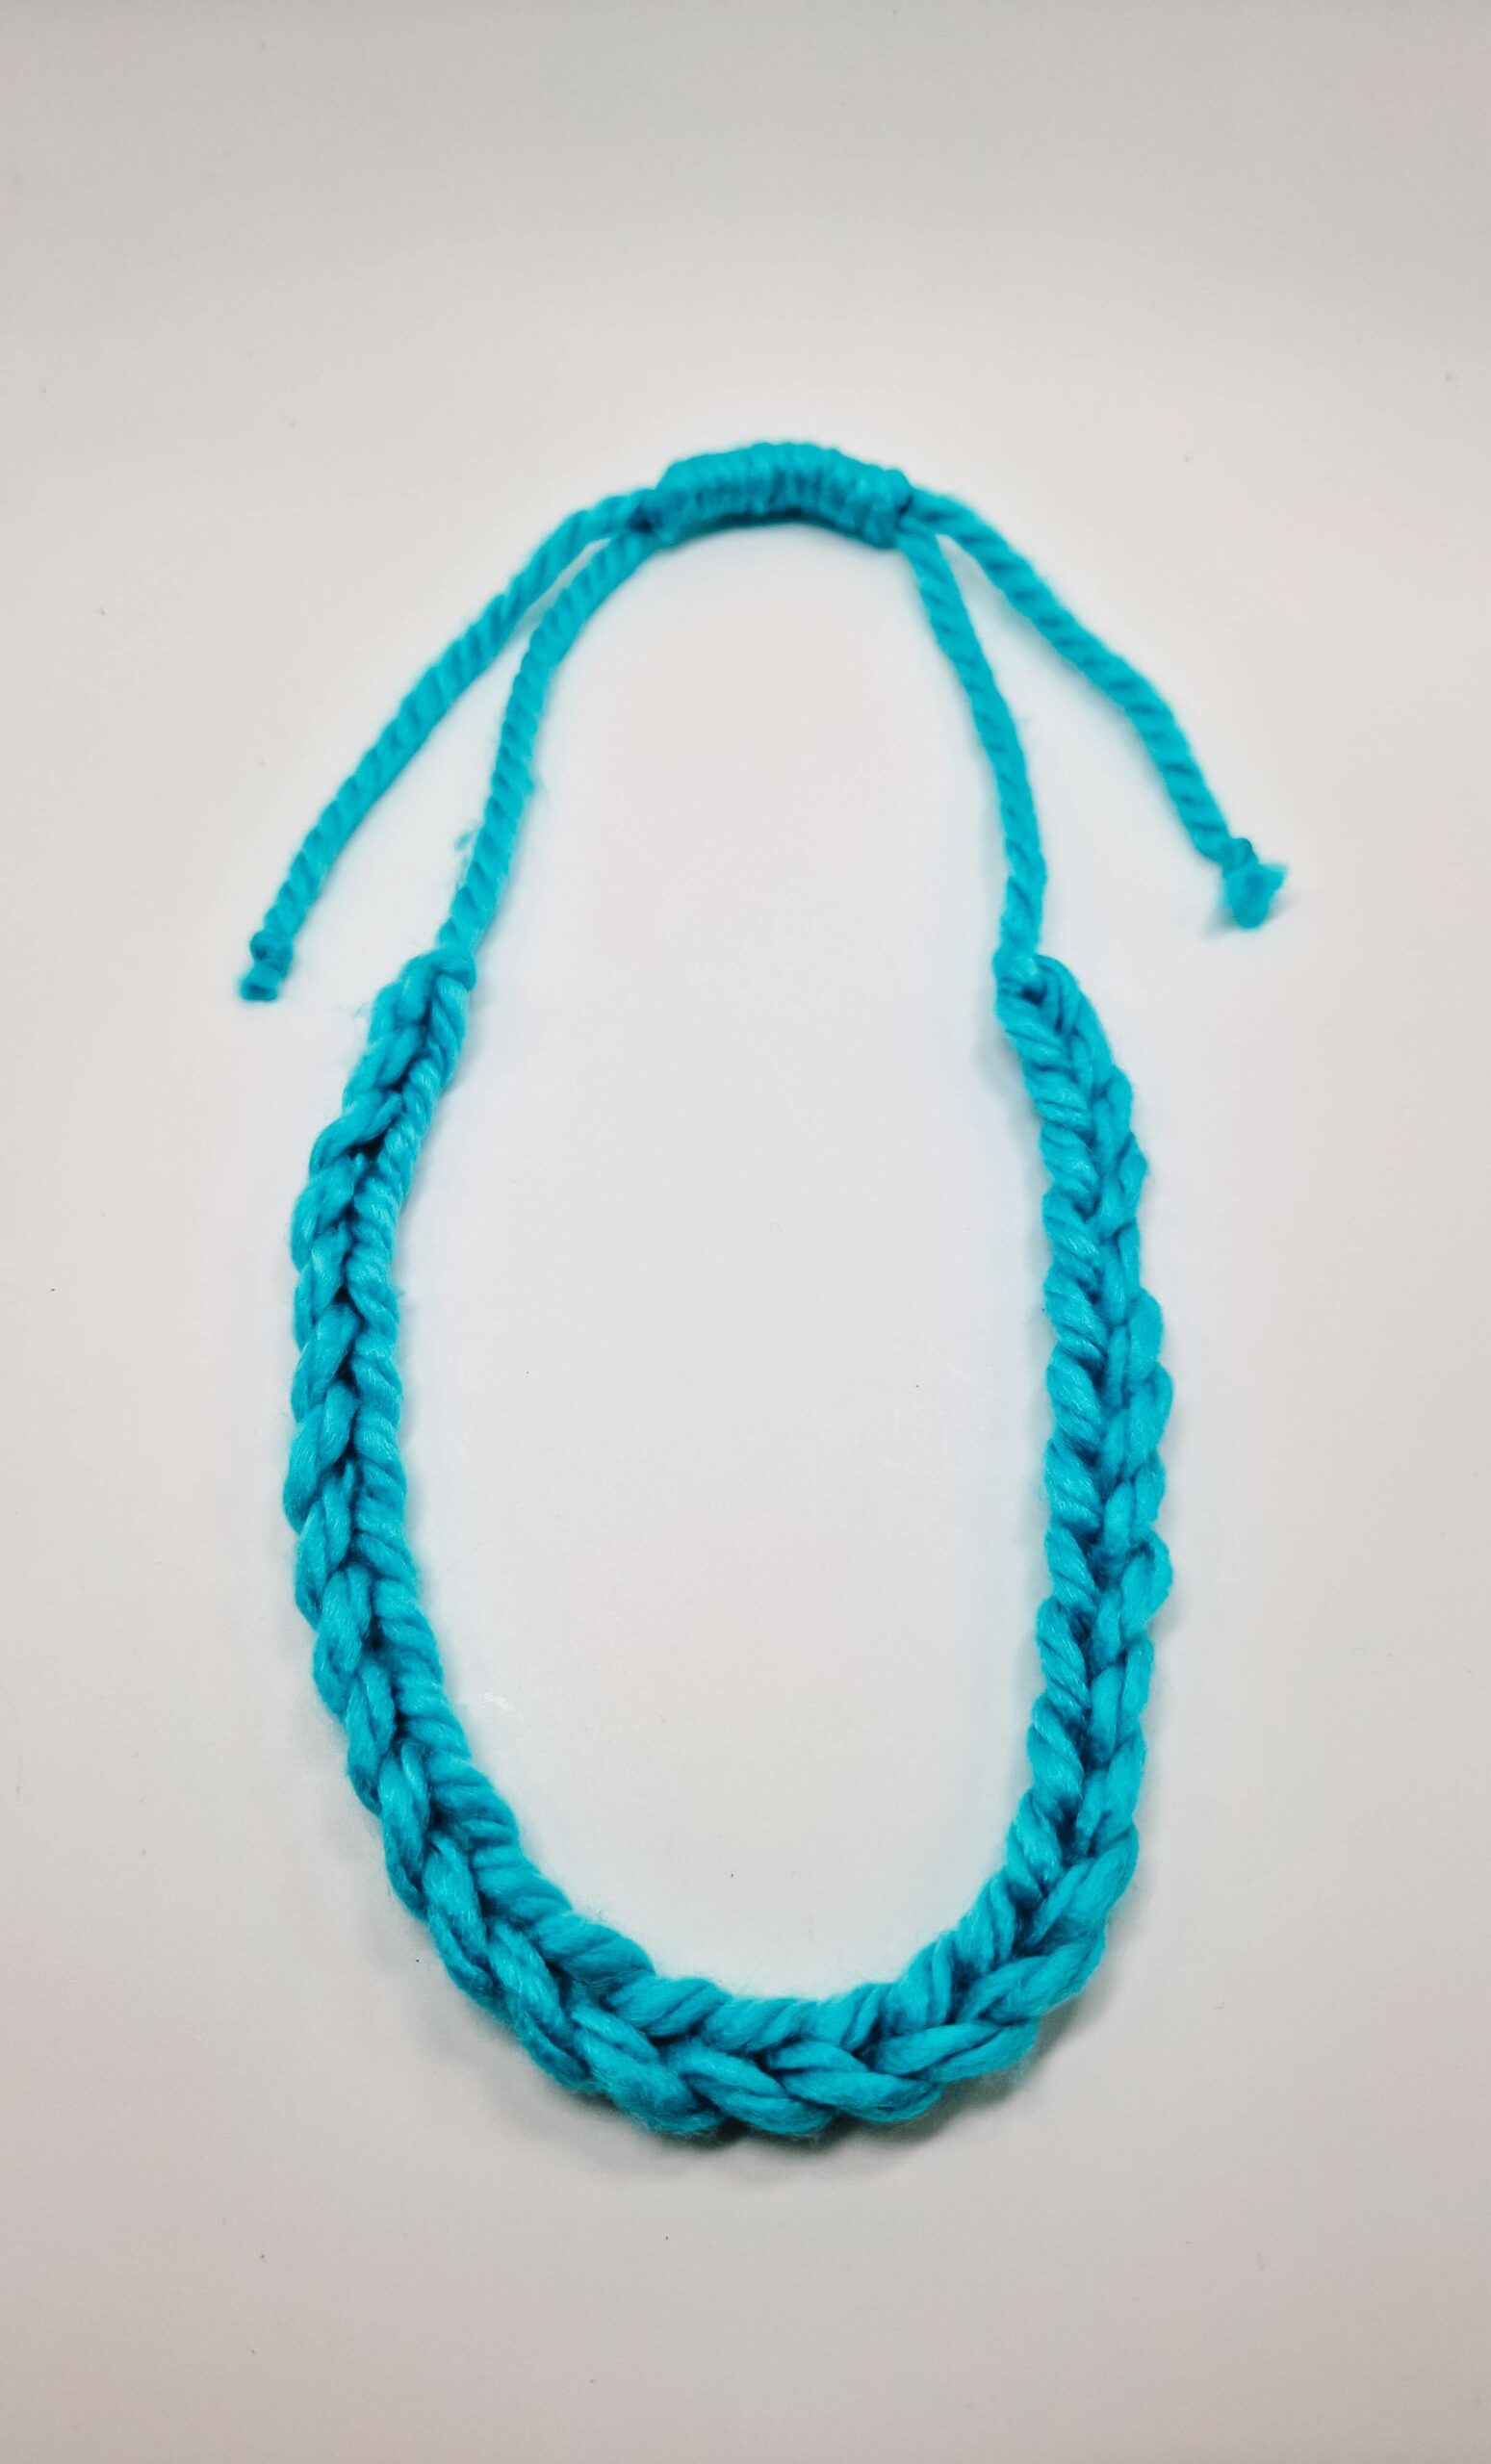 How to Crochet an Adjustable Chain Stitch Necklace